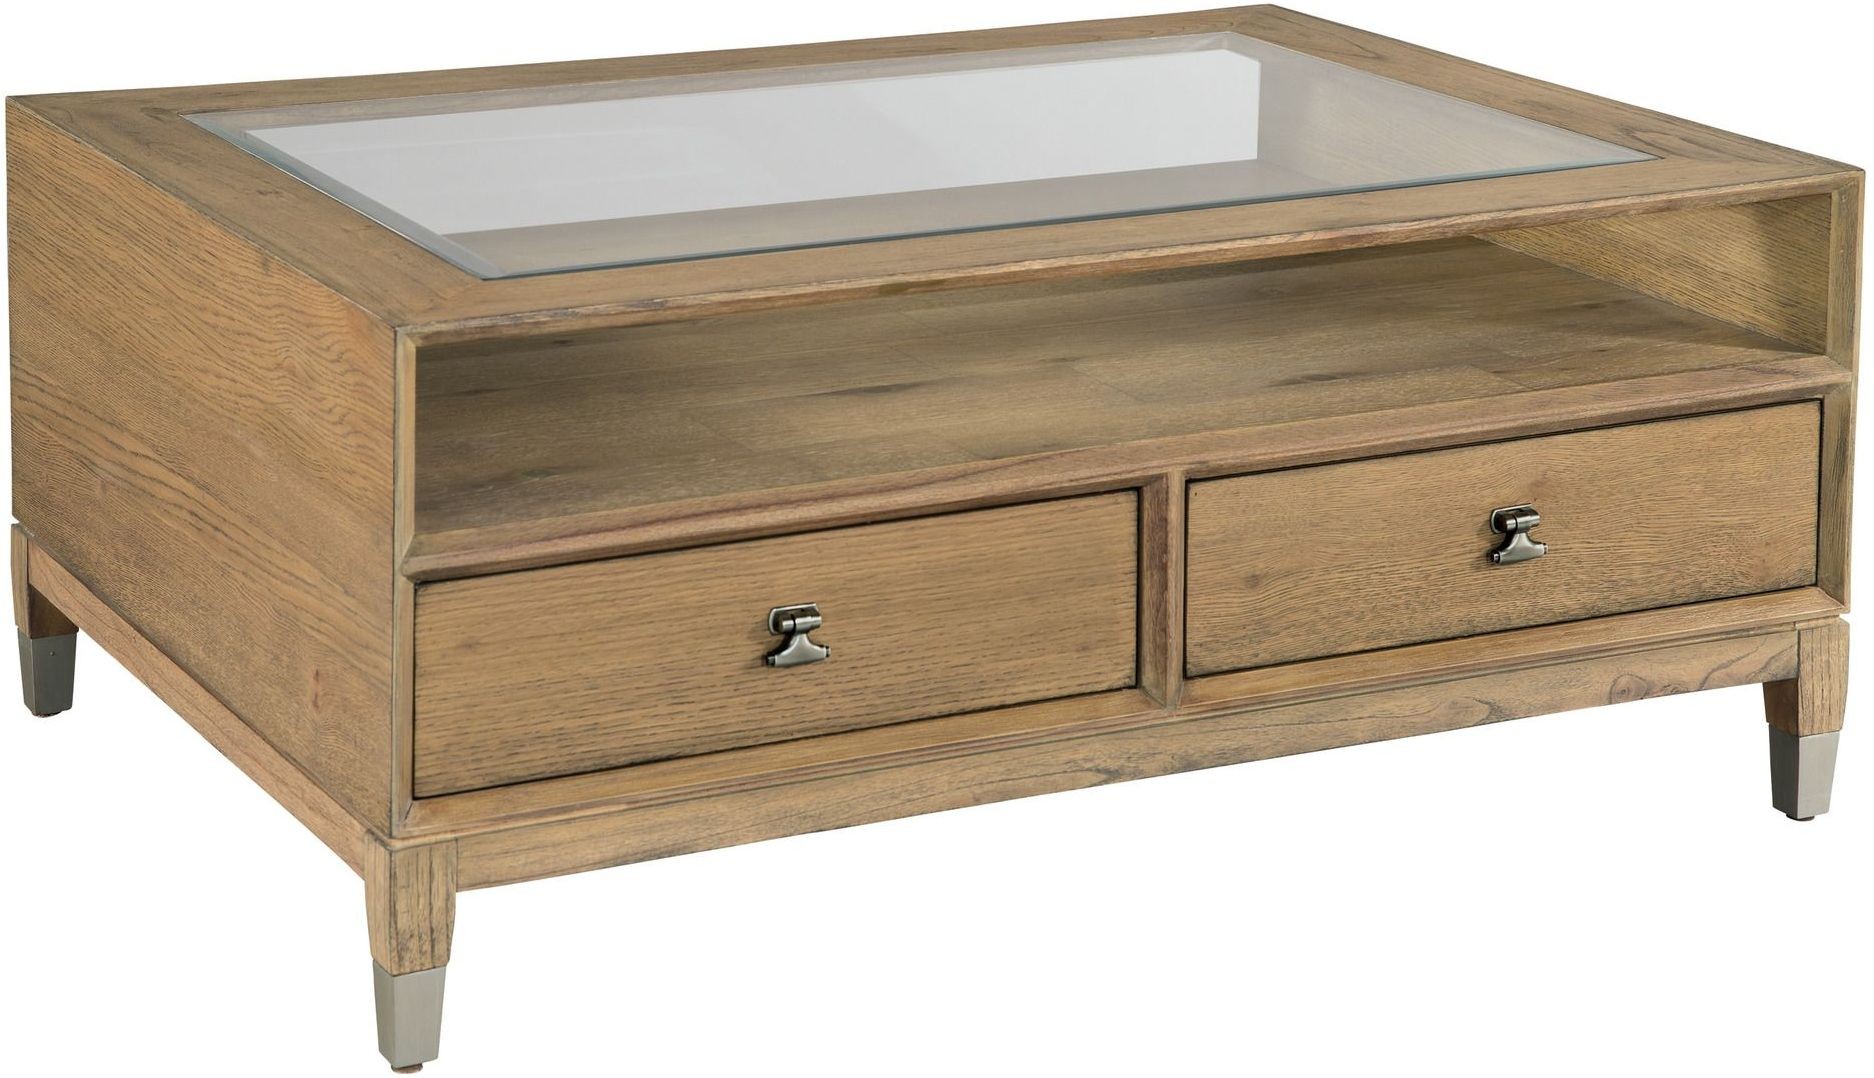 avery park brown glass top coffee table from hekman furniture howardmiller accent hek previousnext prefinished hardwood flooring waiting area kitchen and chairs chest cabinet